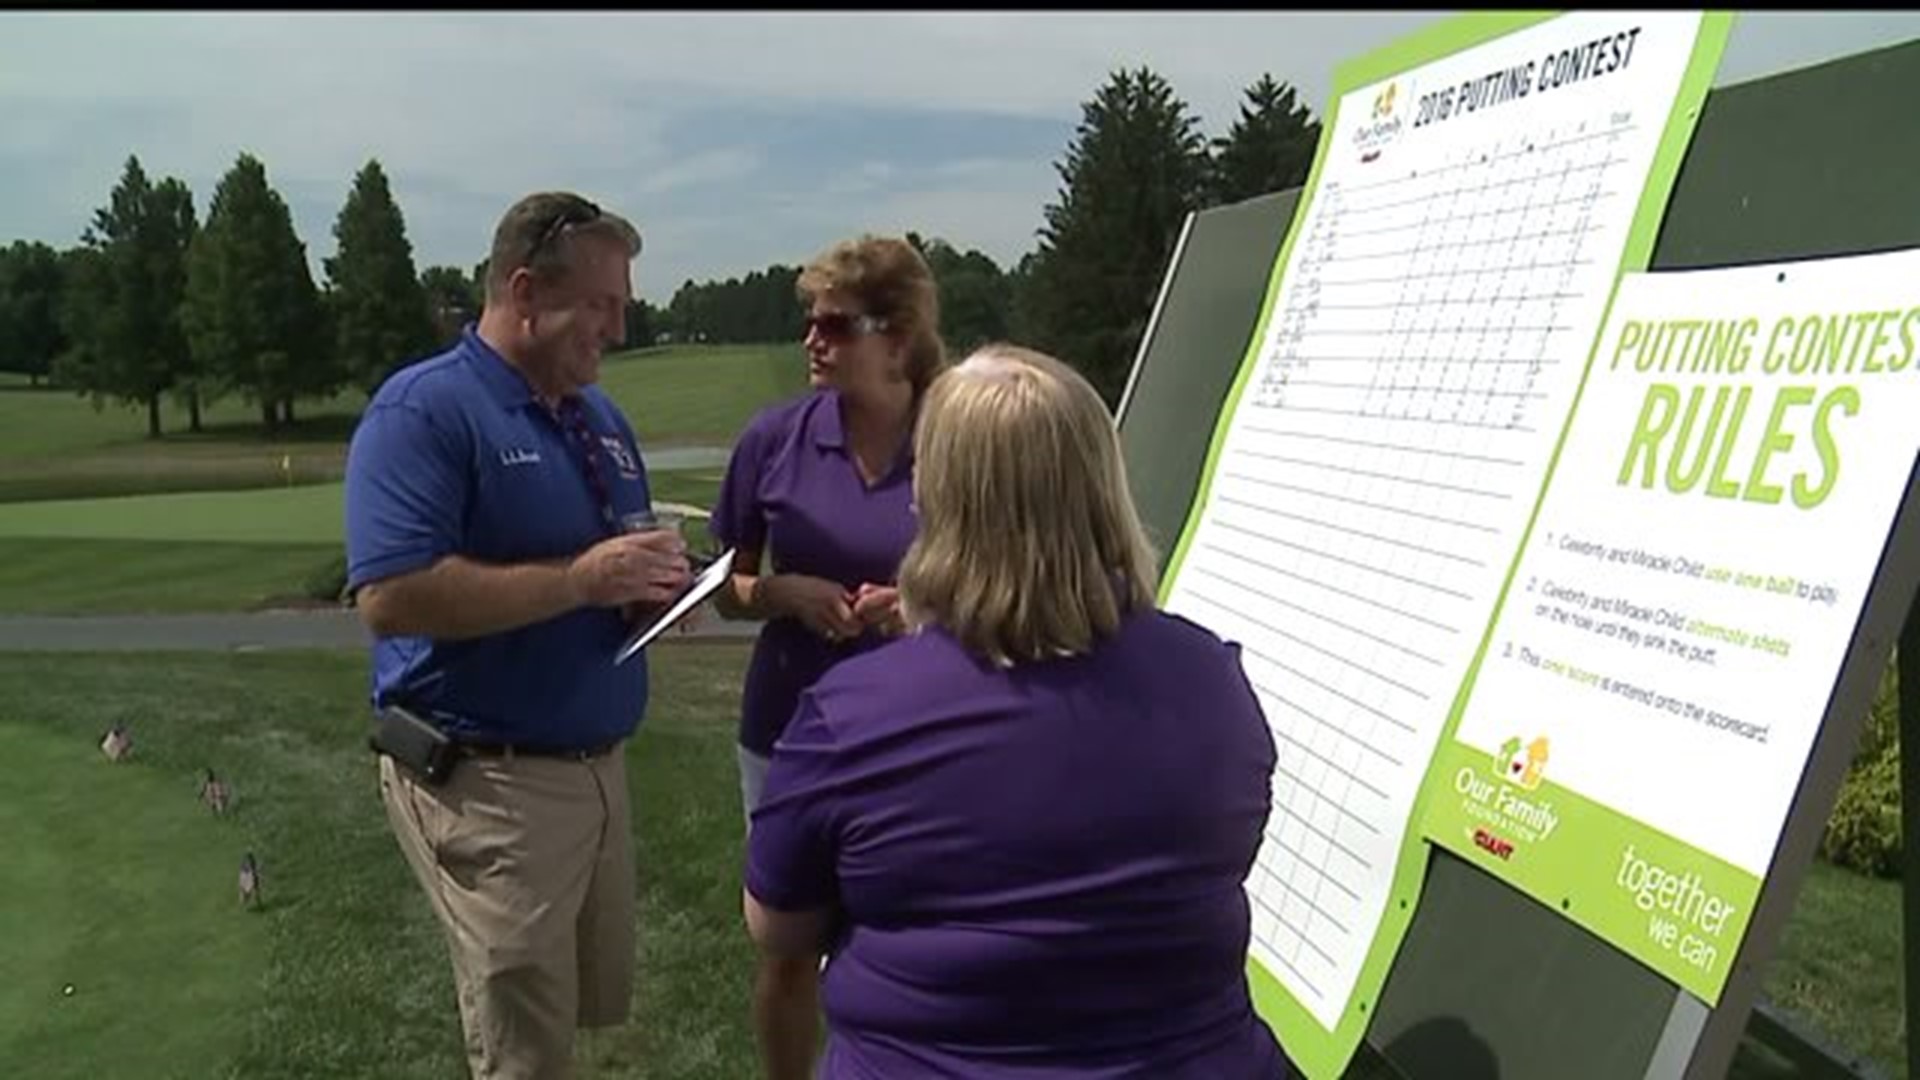 FOX43 teams up with special golfers for a good cause